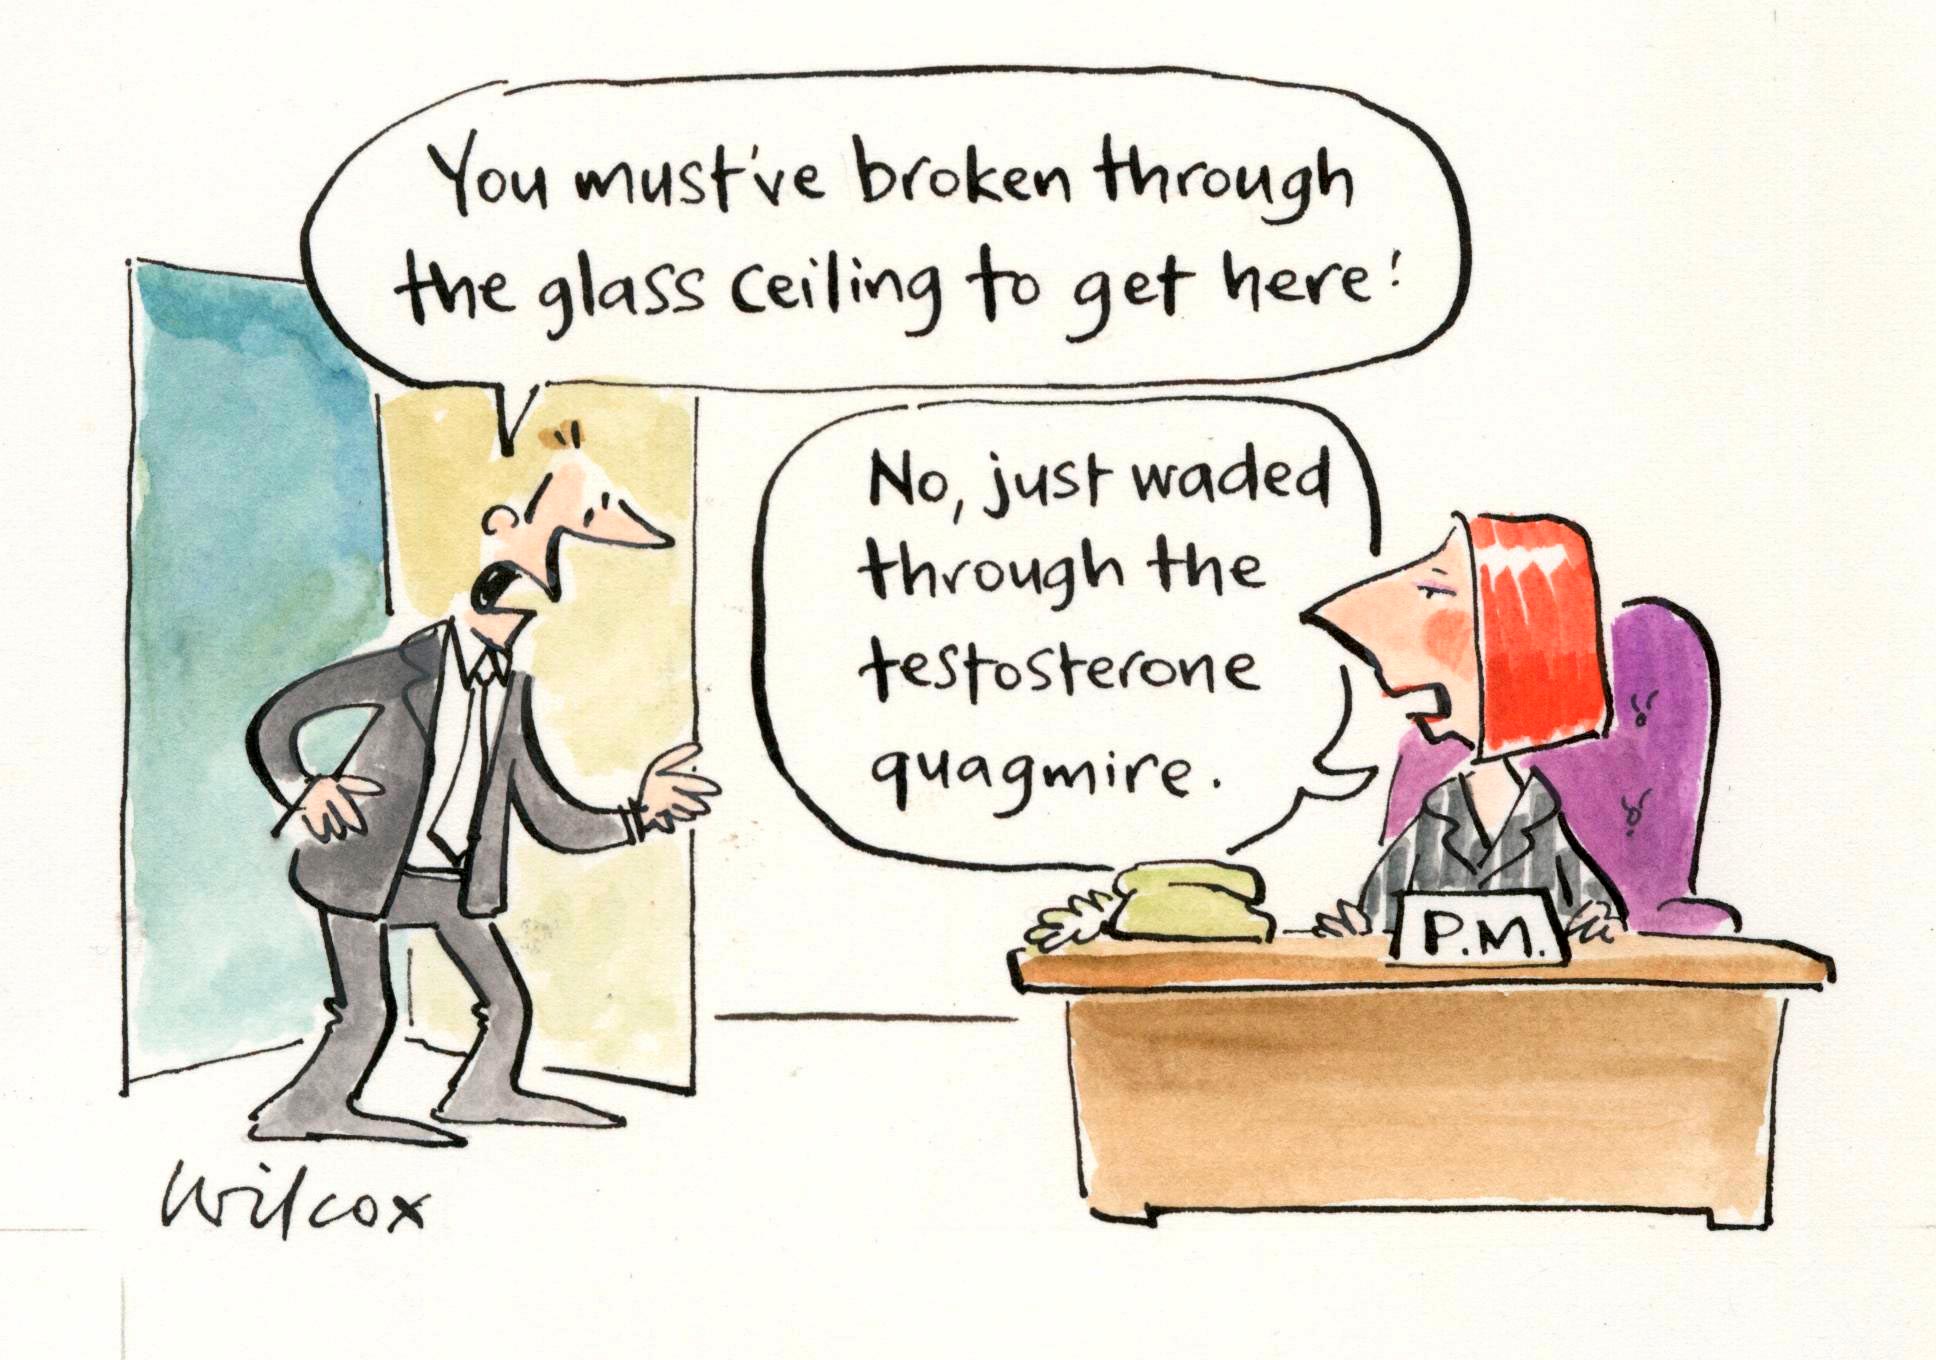 Cartoon titled ‘Glass ceiling’, by Cathy Wilcox, 2010.